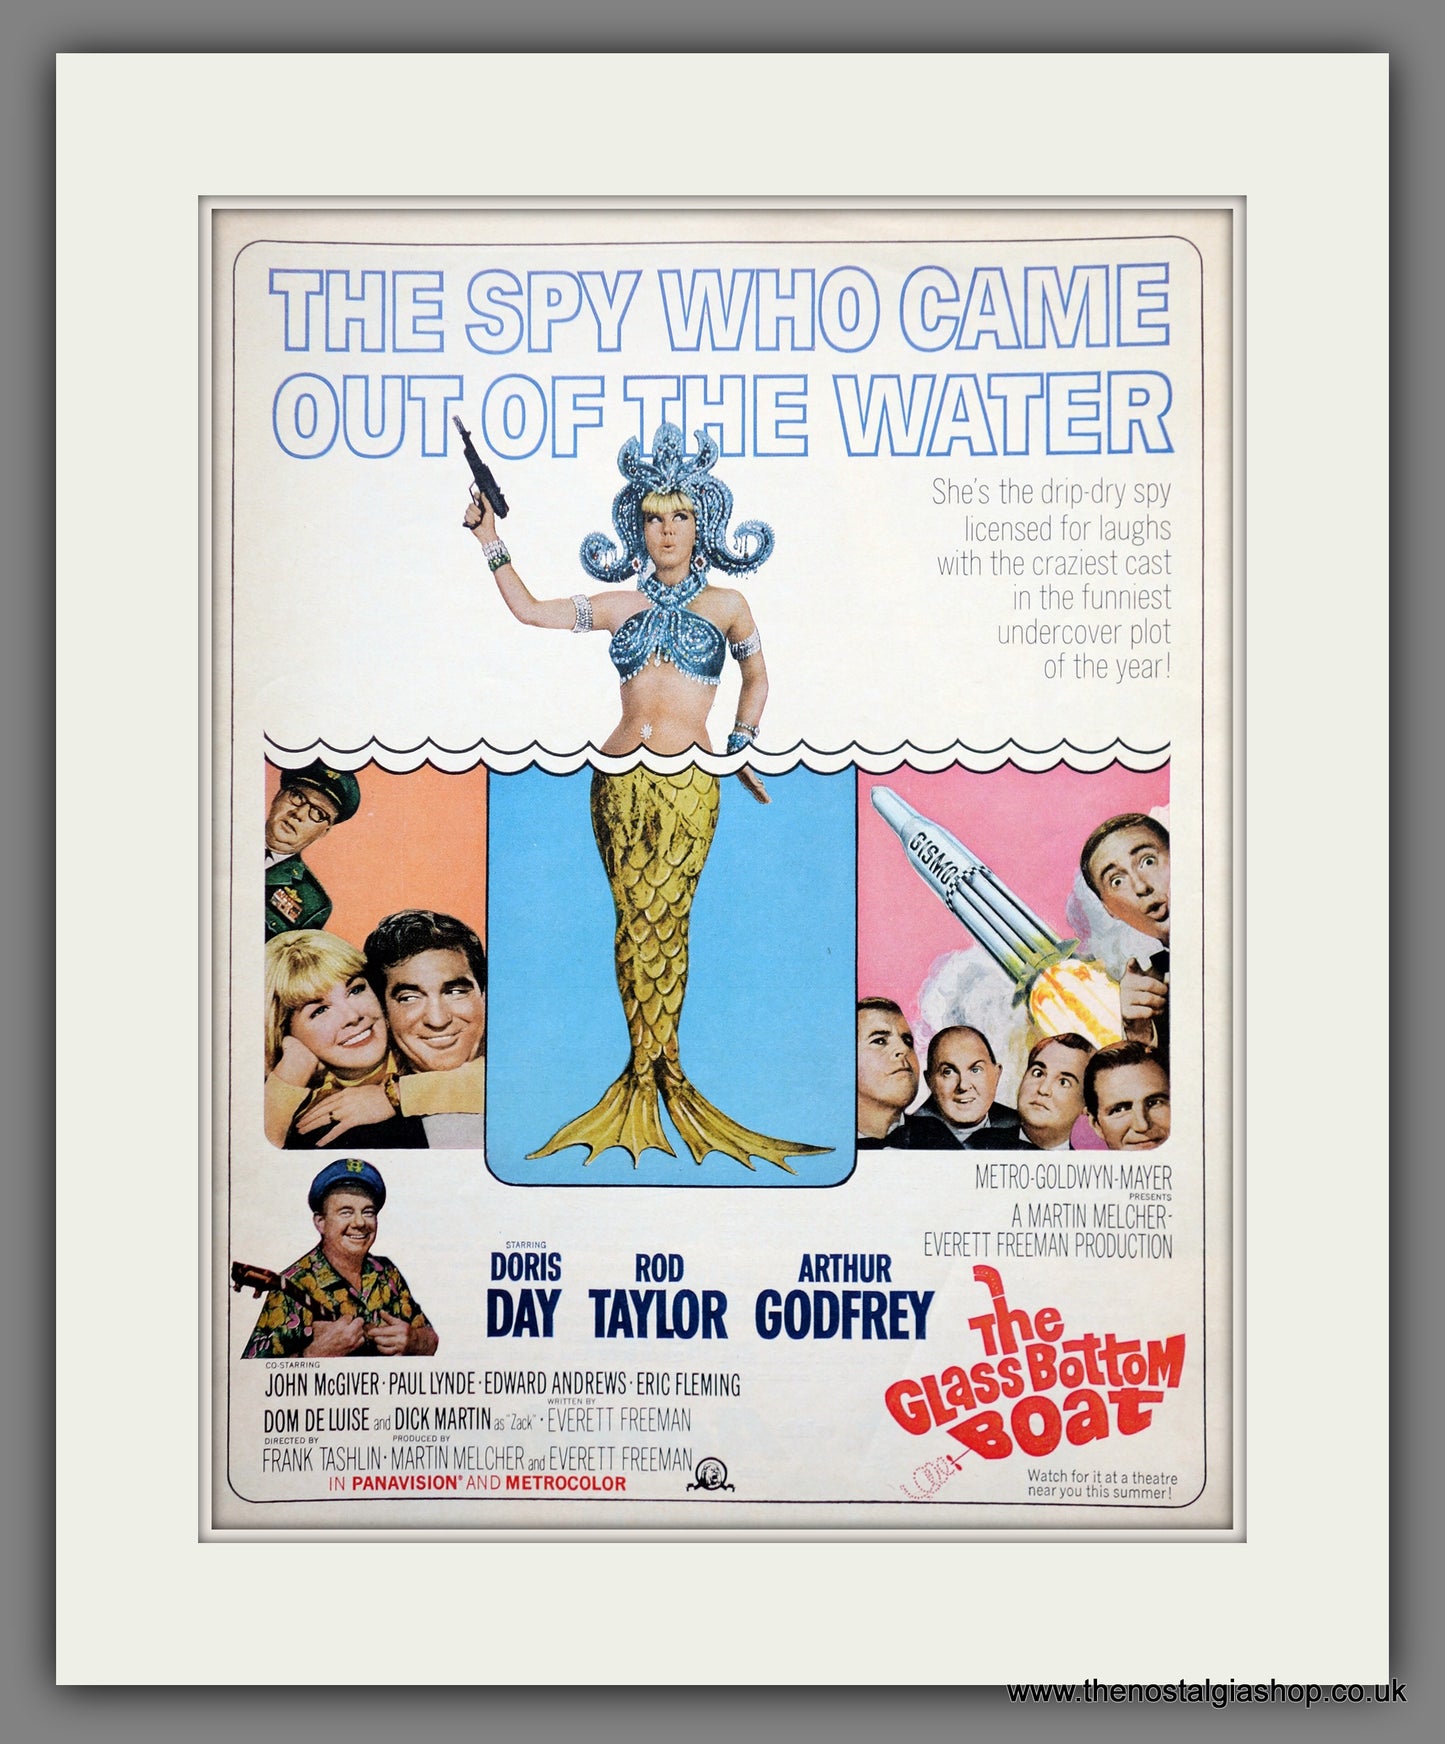 The Spy Who Came Out of The Water. Doris Day. Original Advert 1966 (ref AD301235)